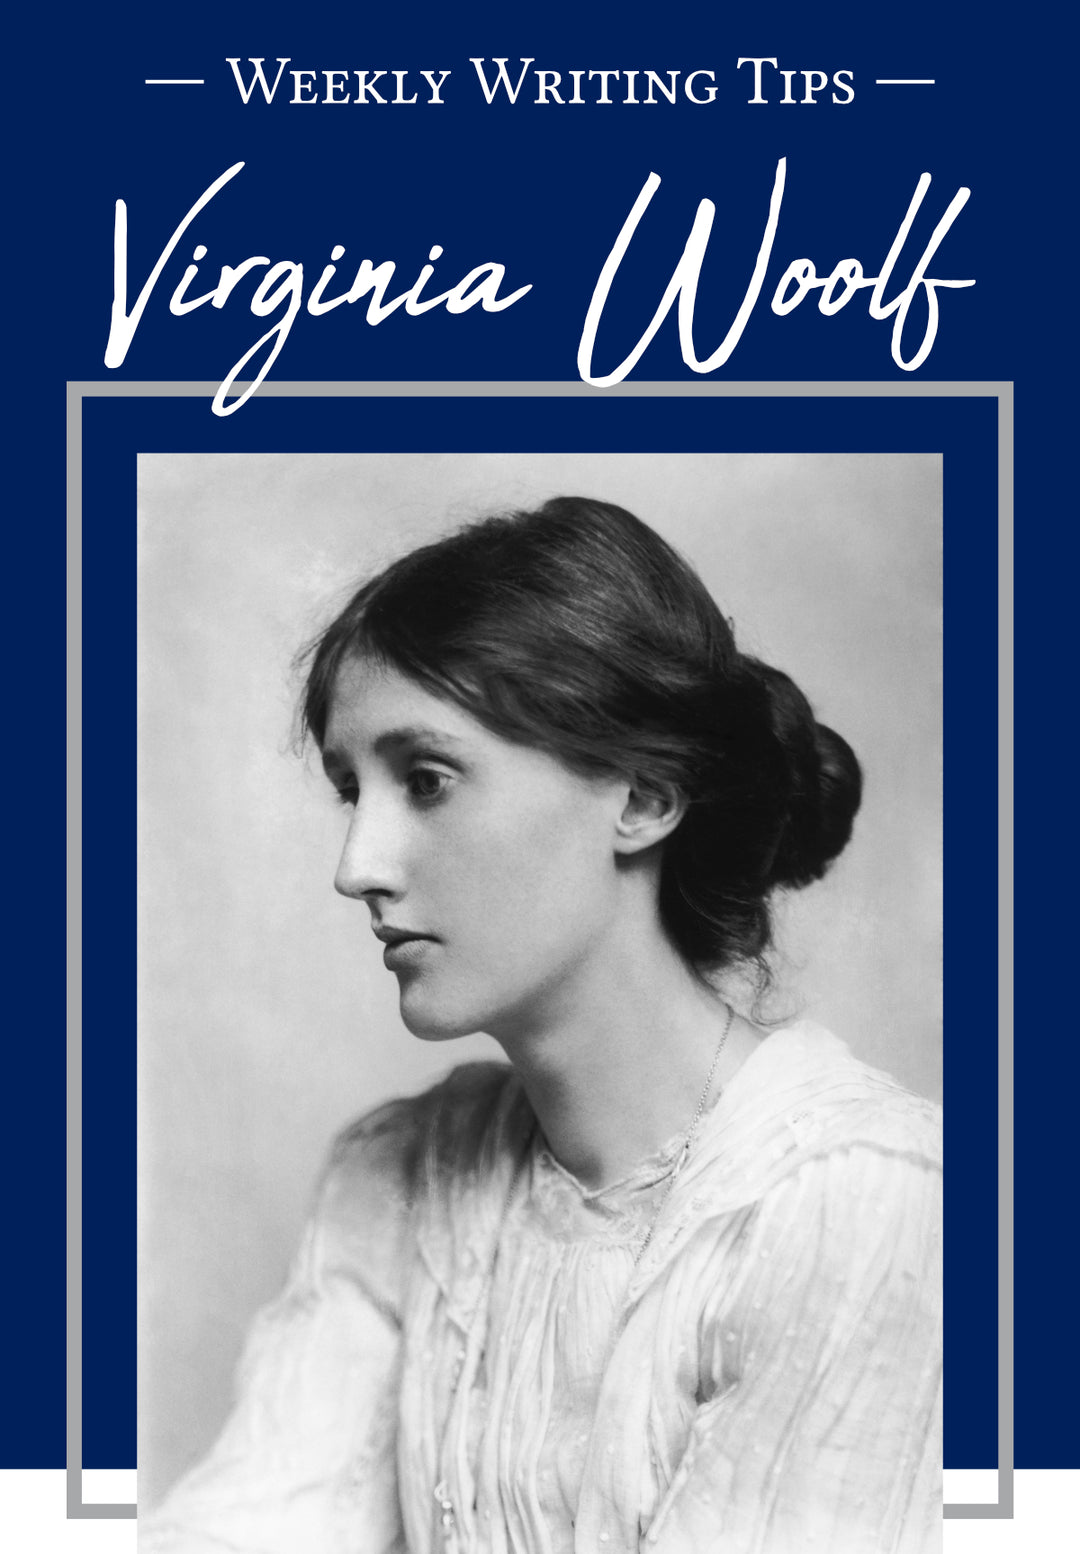 Weekly Writing Tips - Virginia Woolf (pictured: black and white portrait of author Virginia Woolf)